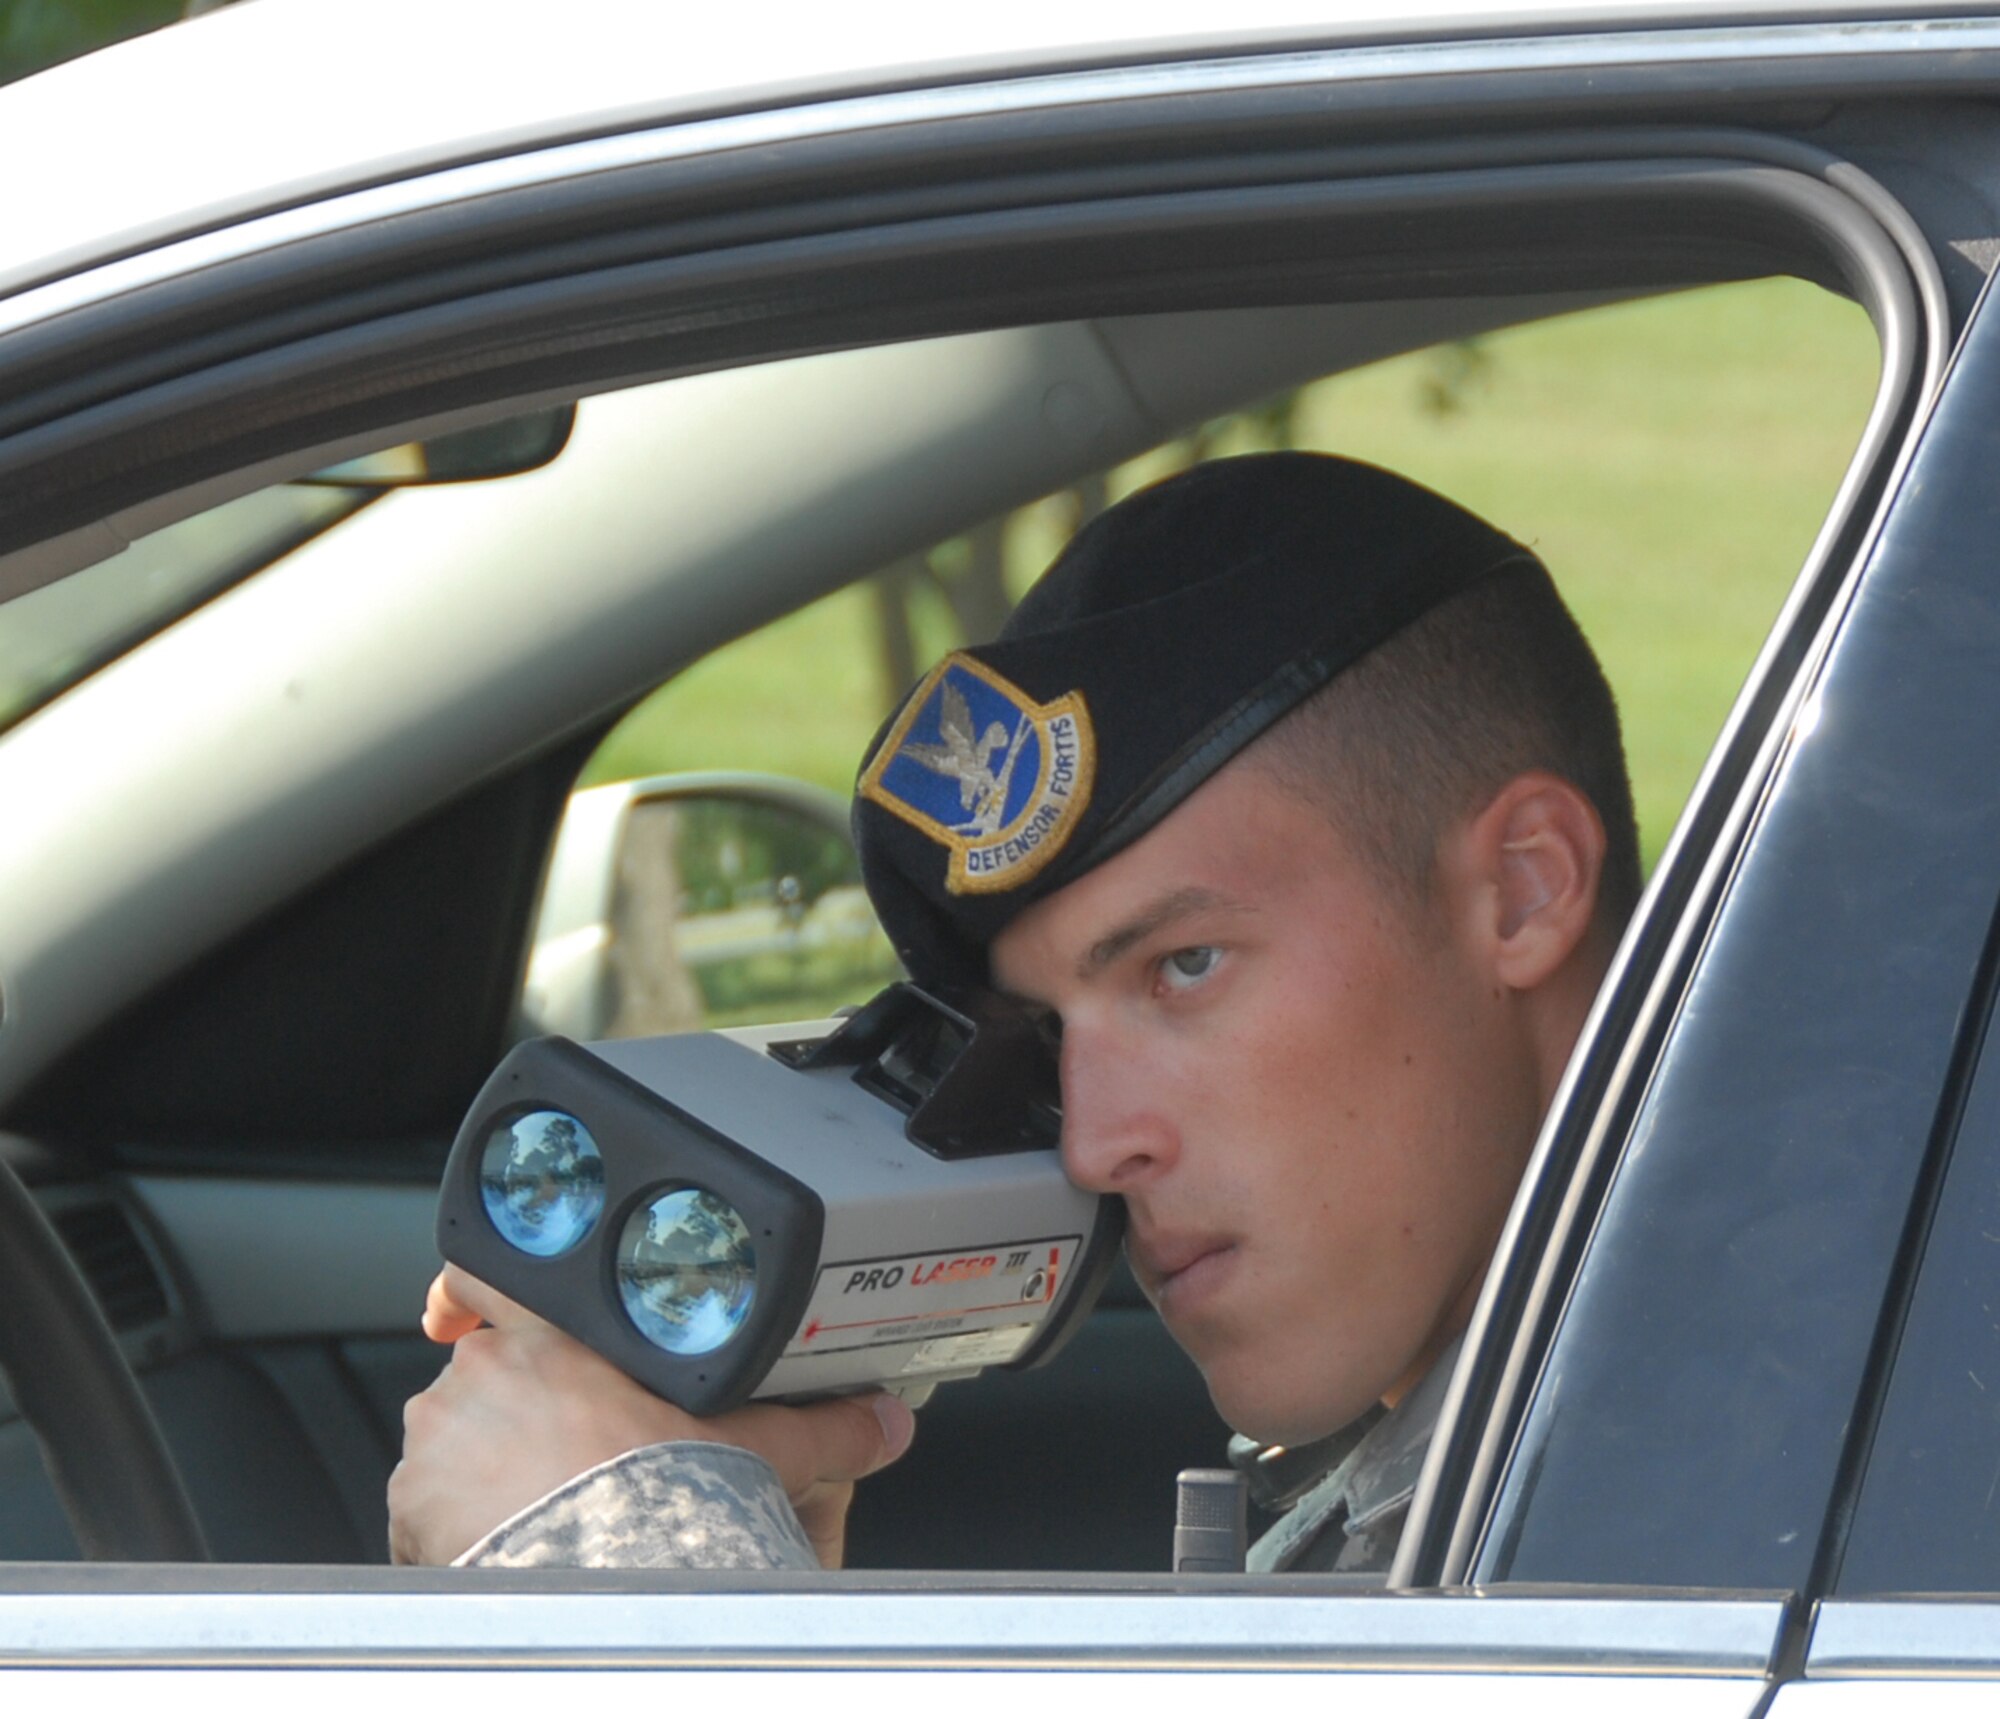 Senior Airman Jonathon Leon, 78th Security Forces, clocks cars on base. Speeders could potentially lose driving privileges on base, even first-time offenders. U.S. Air Force photo by Tech Sgt. Vannie Miller